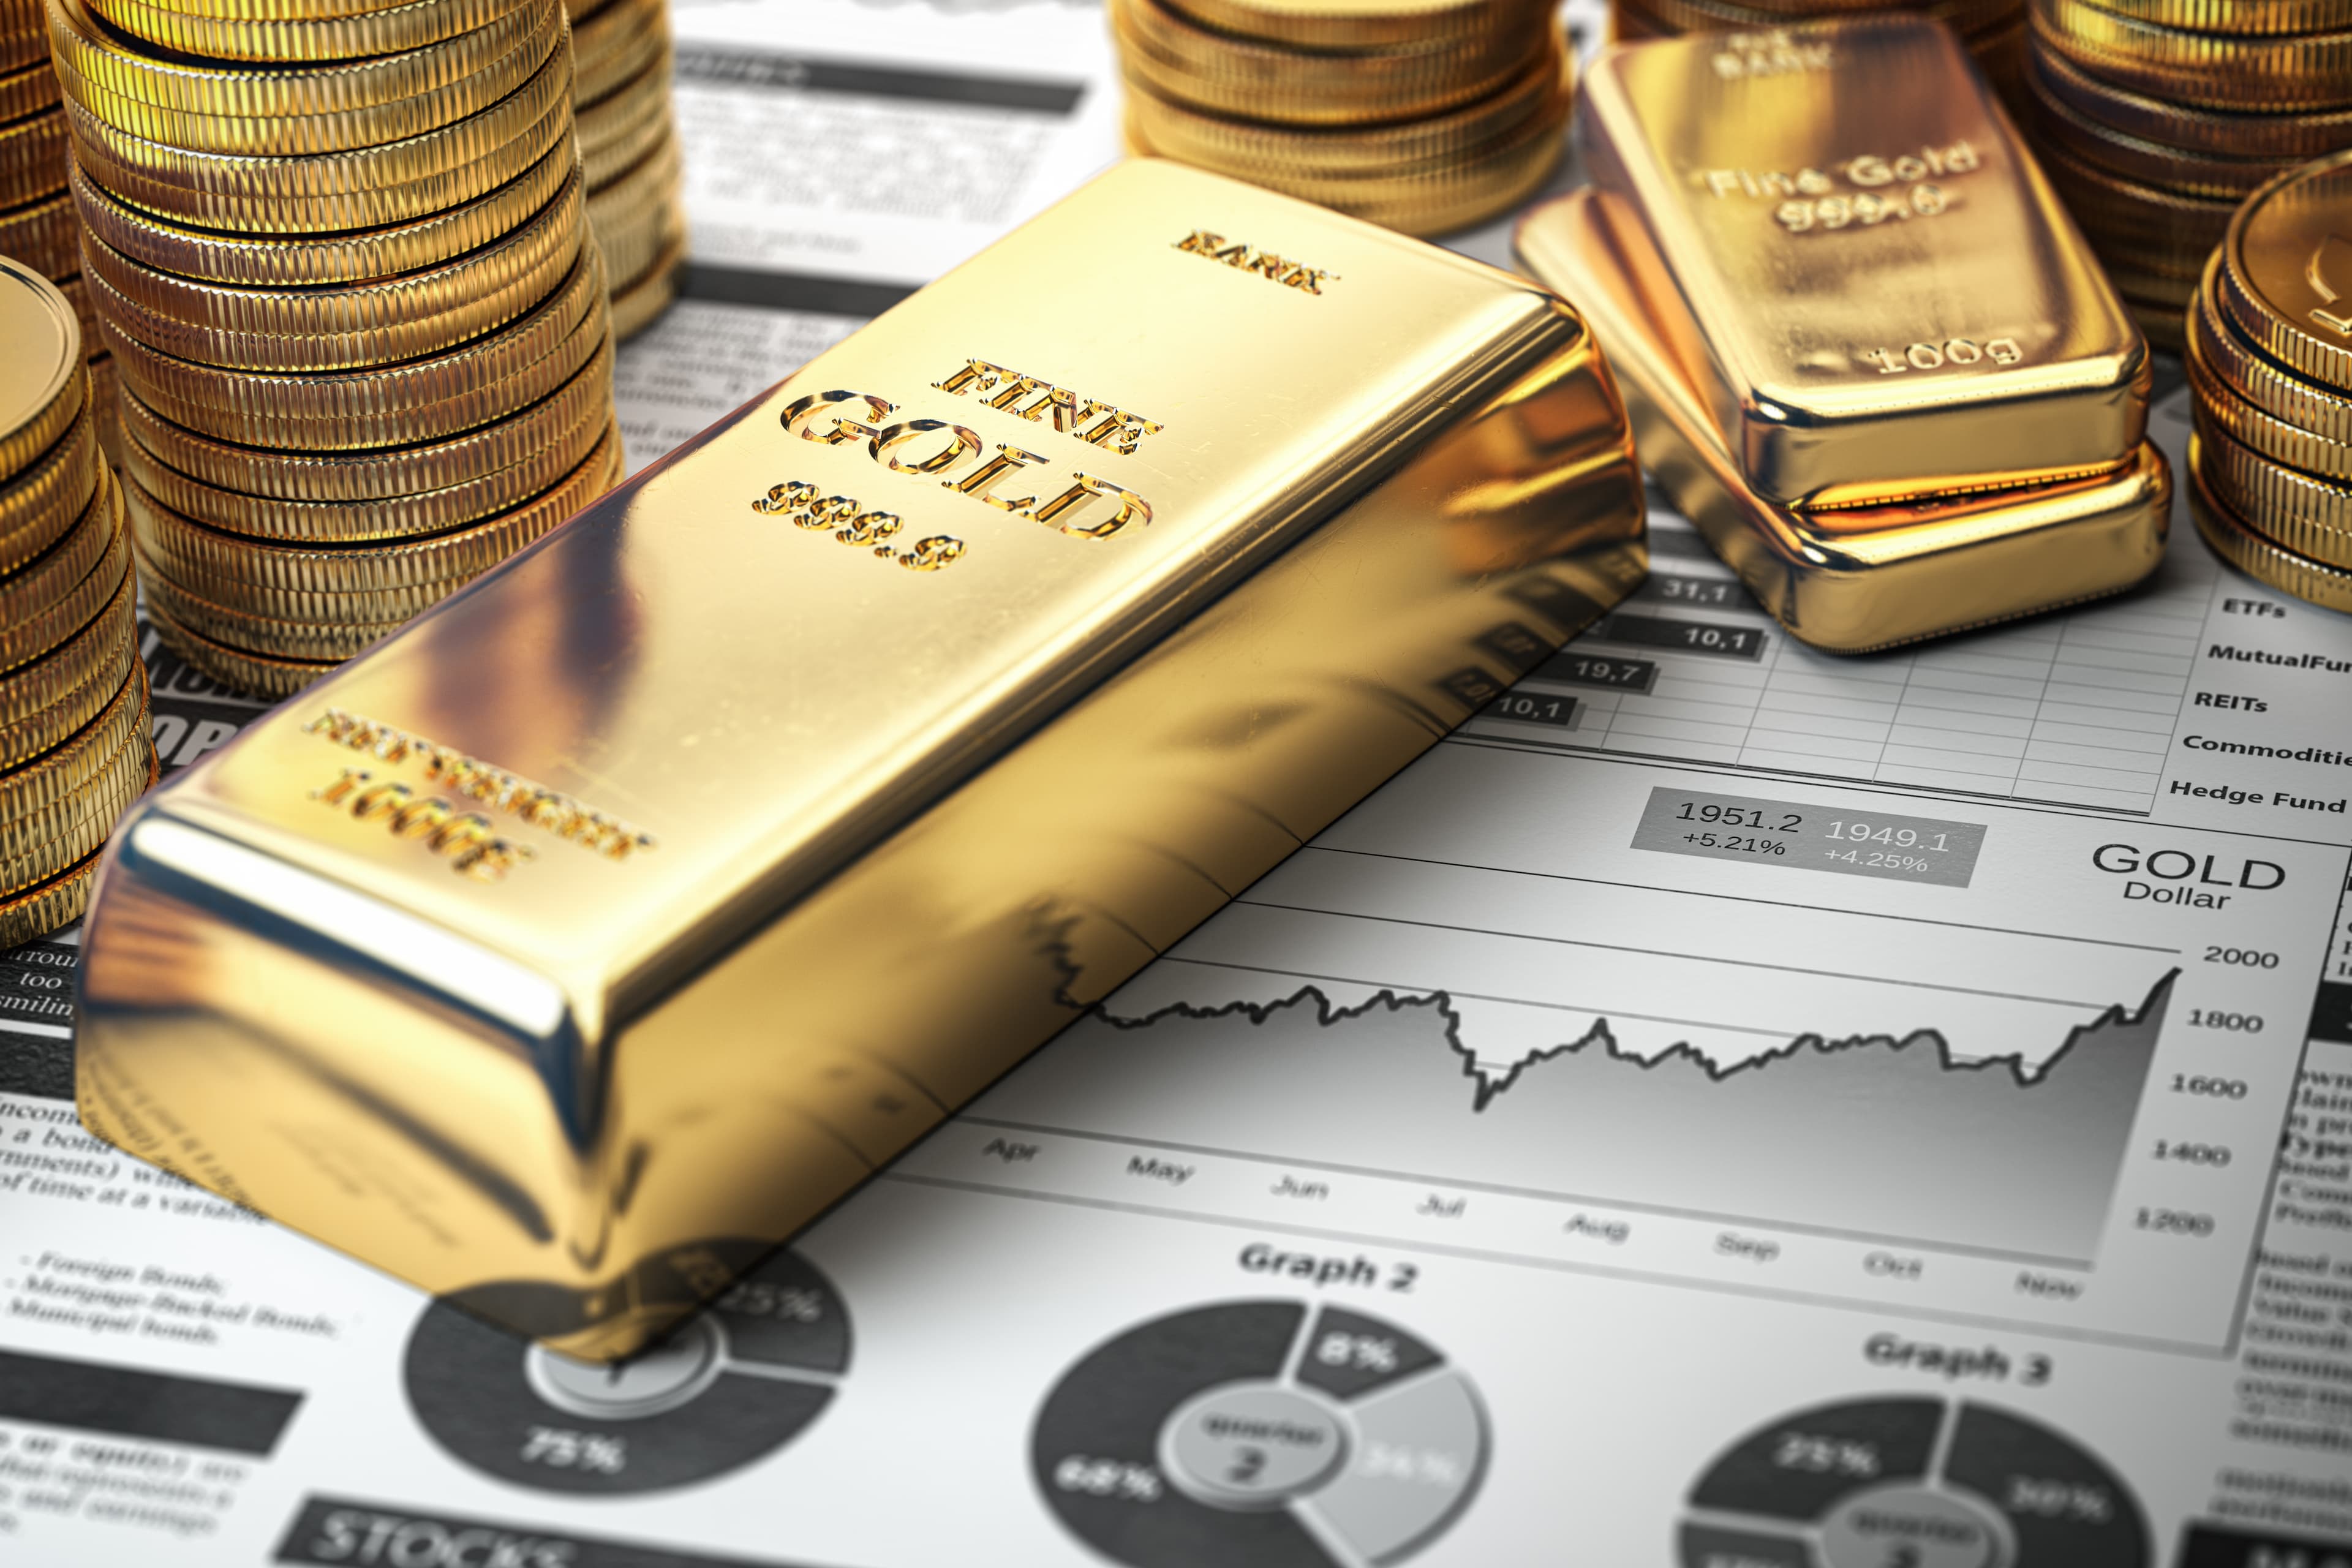 Gold Stocks and Major Companies: Insider Buying and Warning Signs